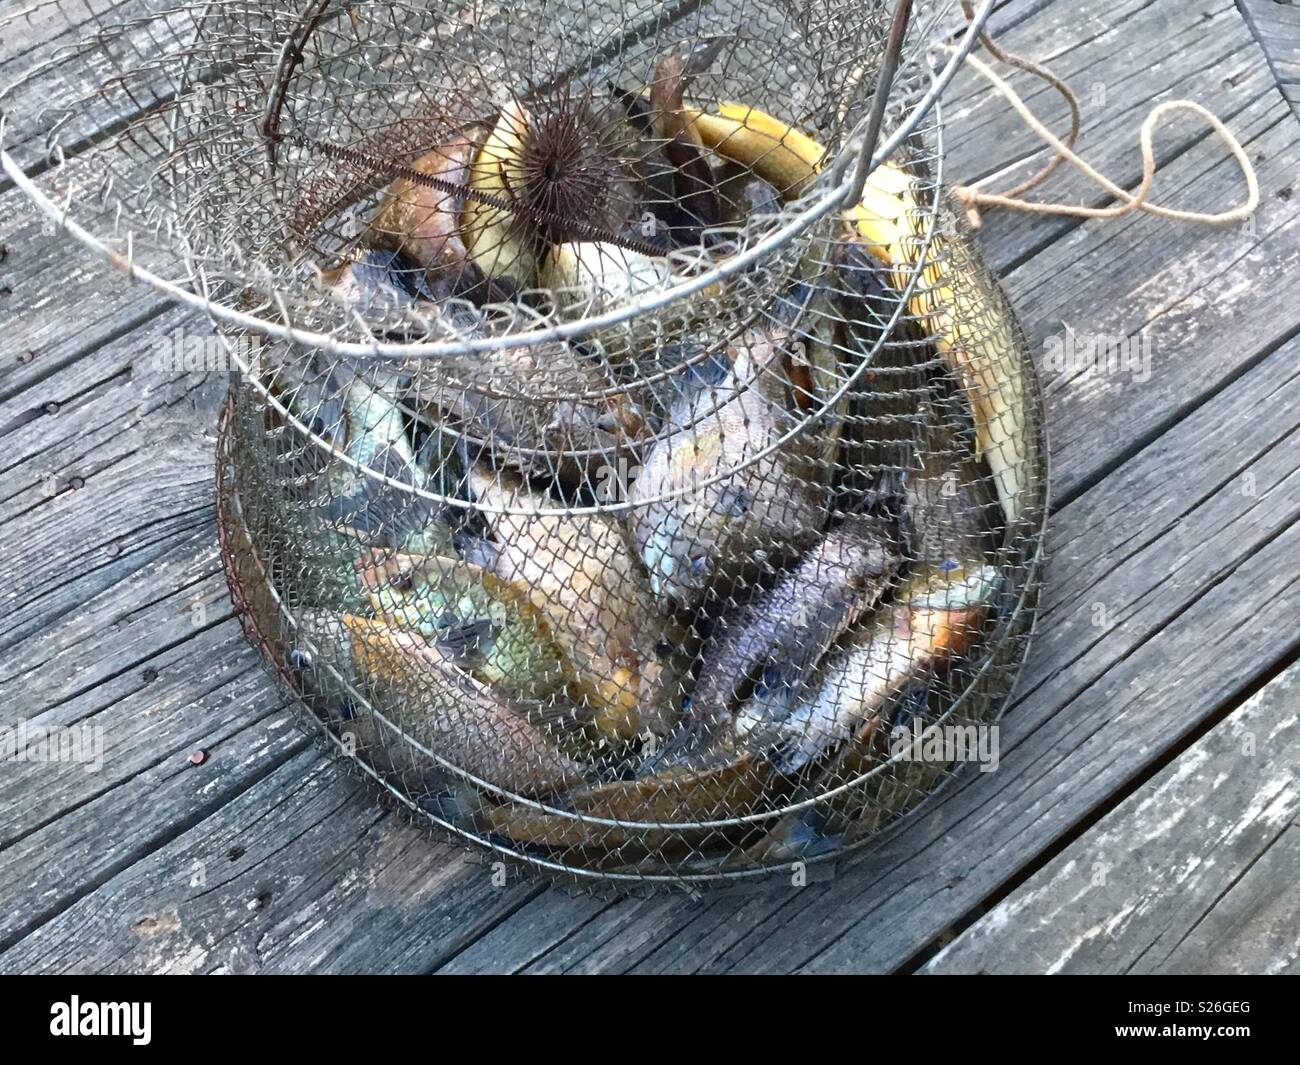 Live fish in wire basket sitting on wooden planks Stock Photo - Alamy